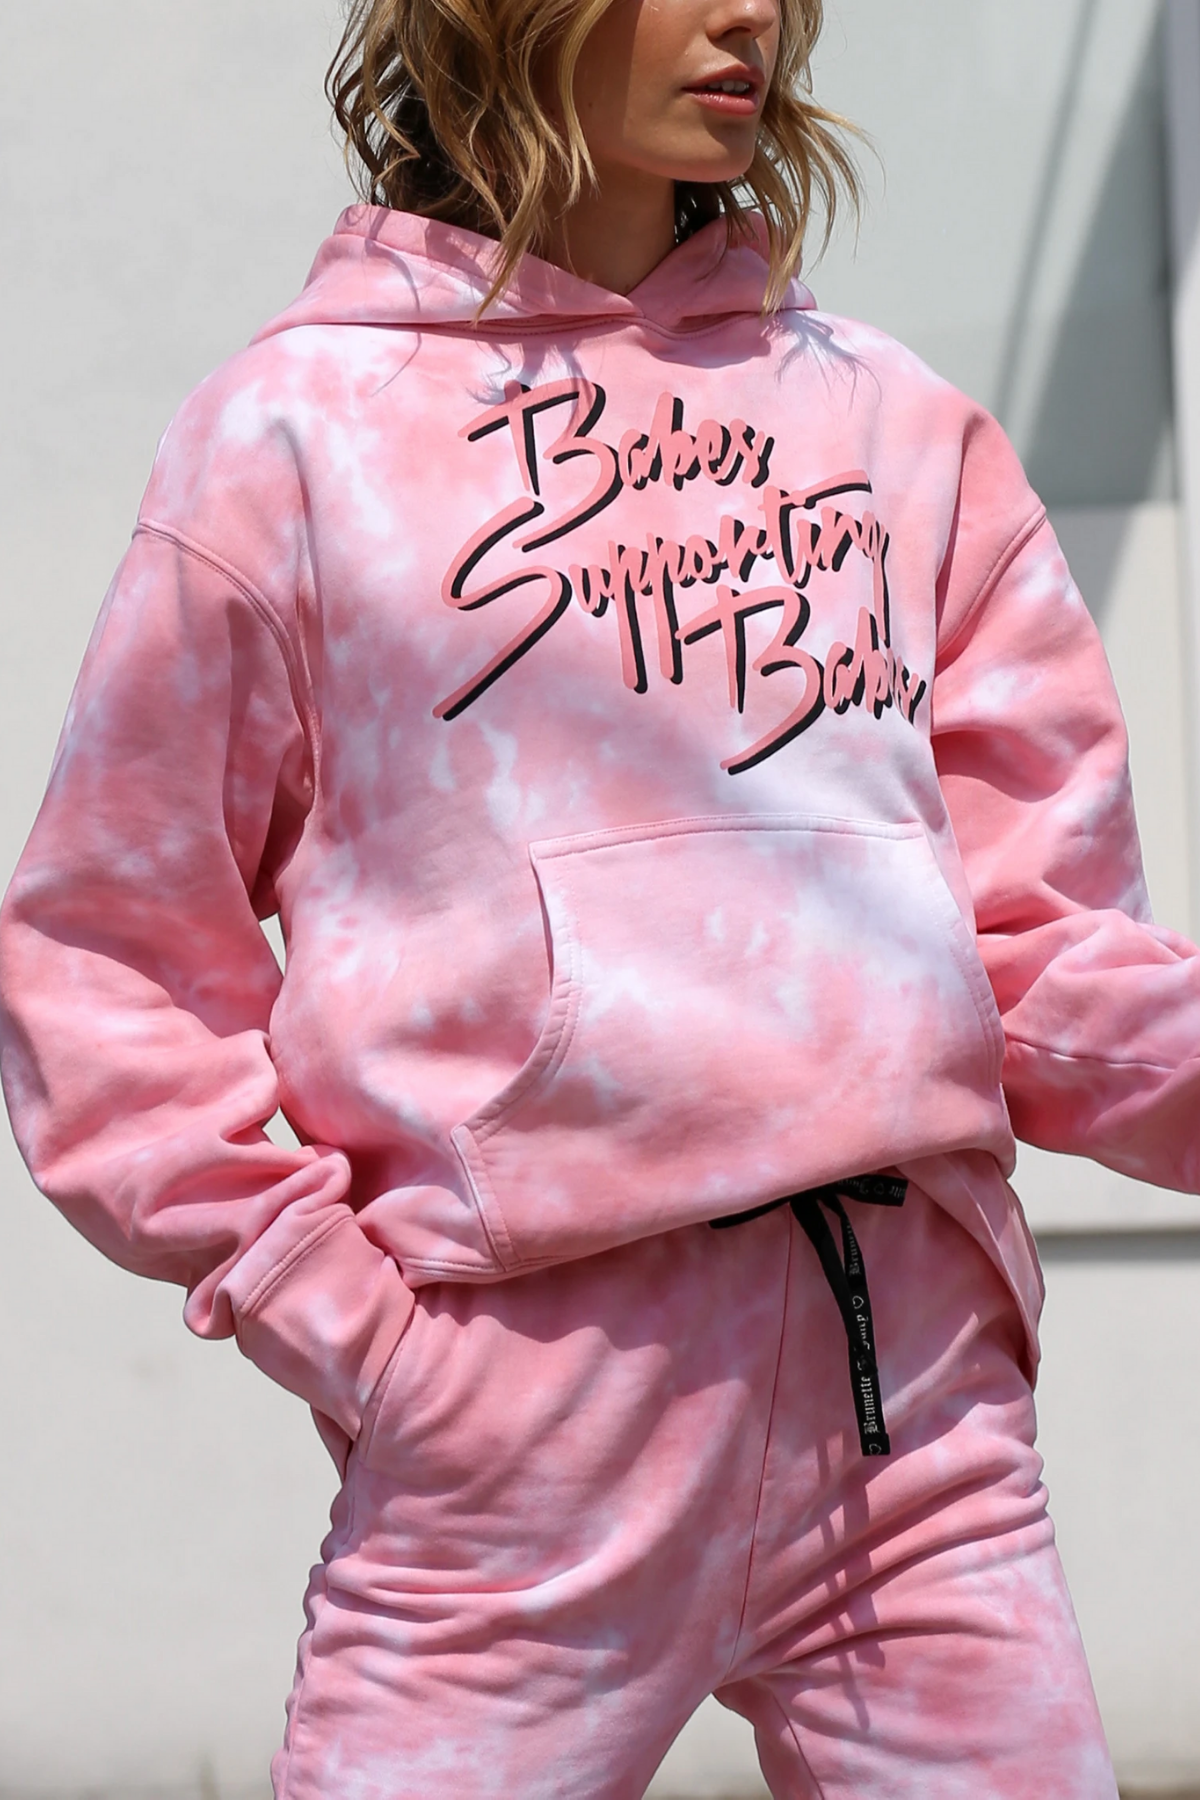 The "BABES SUPPORTING BABES" Pink Marble Tie-Dye Step Sister Hoodie